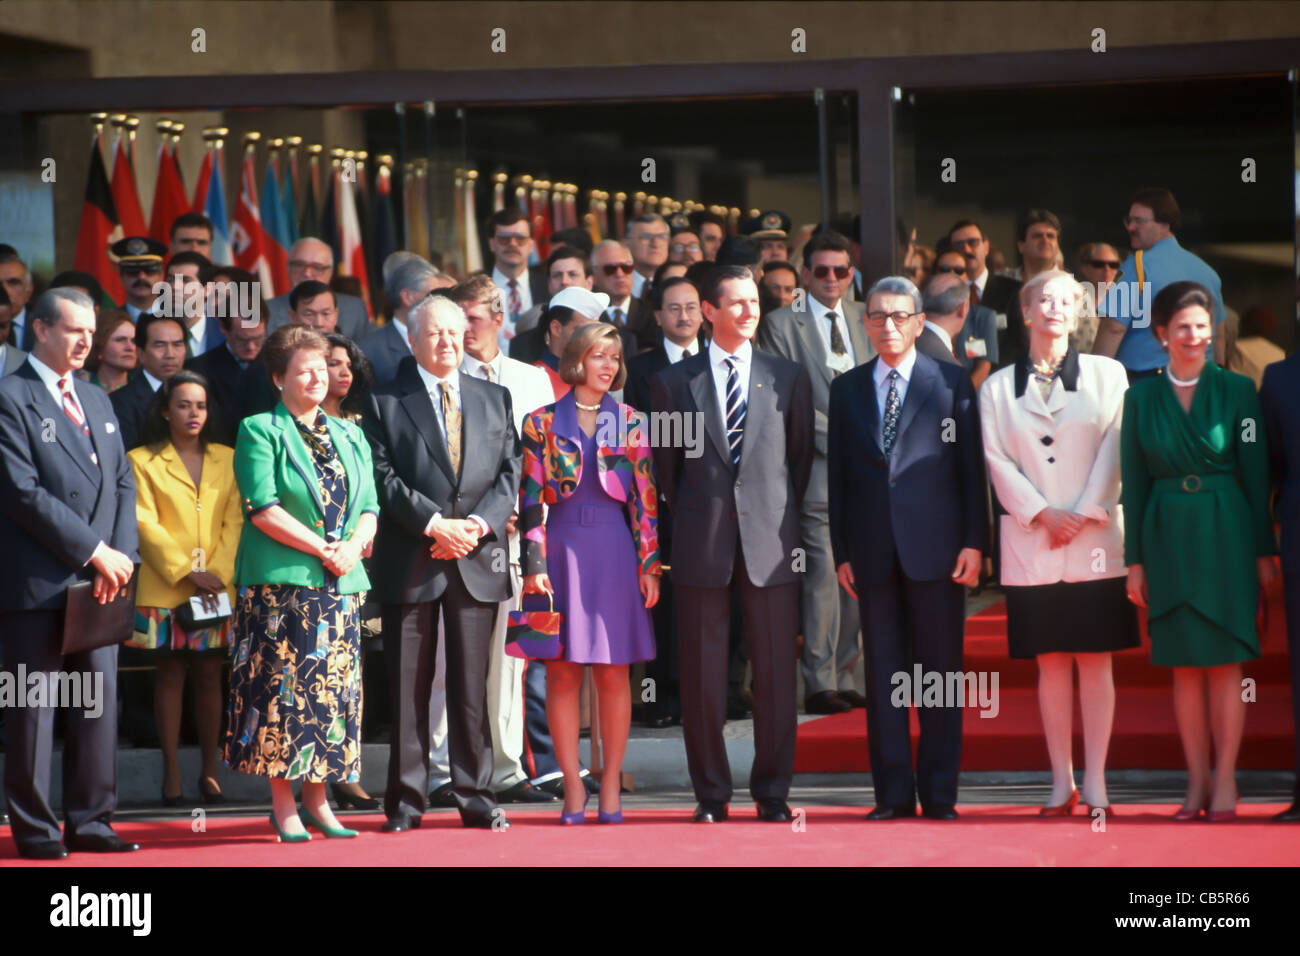 United Nations Conference on Environment and Development, Rio de Janeiro, Brazil, 3rd to 14th June 1992. World leaders photo call: front row: Gro Harlem Bruntland, Brazilian President Fernando Collor de Mello and his wife, UN Secretary General Boutros Boutros Ghali. Stock Photo